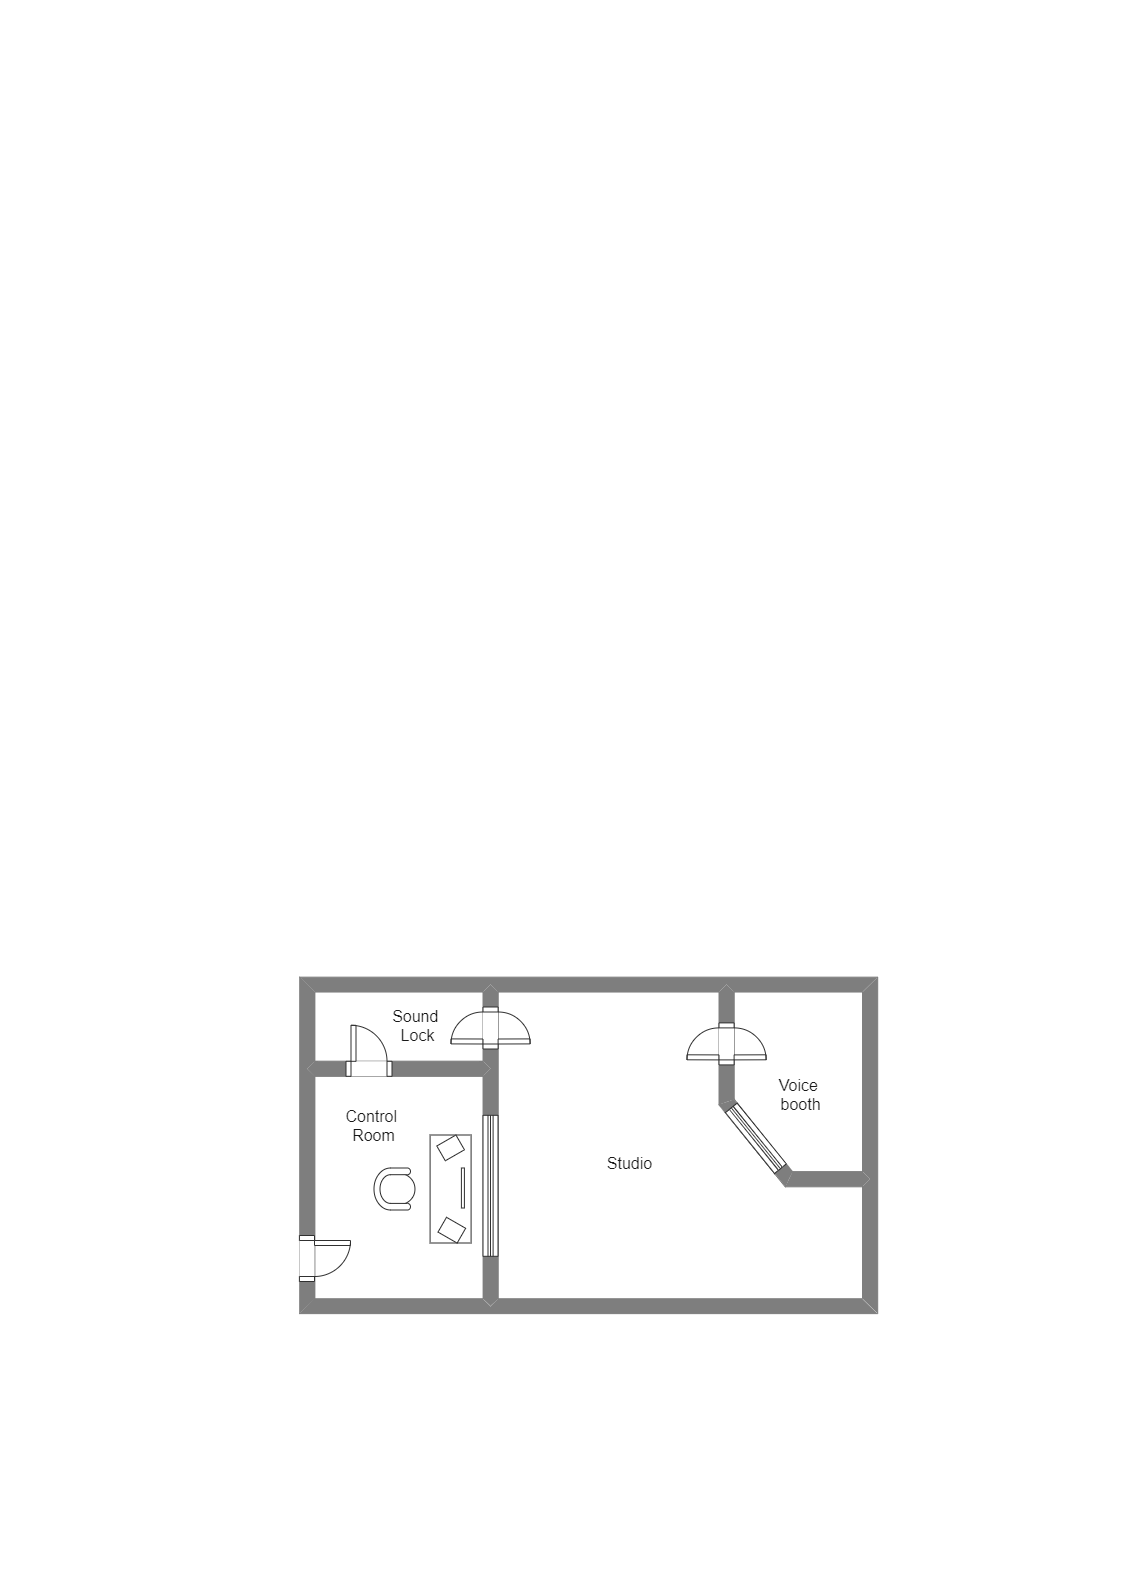 In the Gallery Studio Floor Plan diagram, we see that Studio, Voice Booth, Control Room, and Sound Lock area are properly marked. It should be noted here that a recording studio is a specialized facility for sound recording, mixing, and audio production o